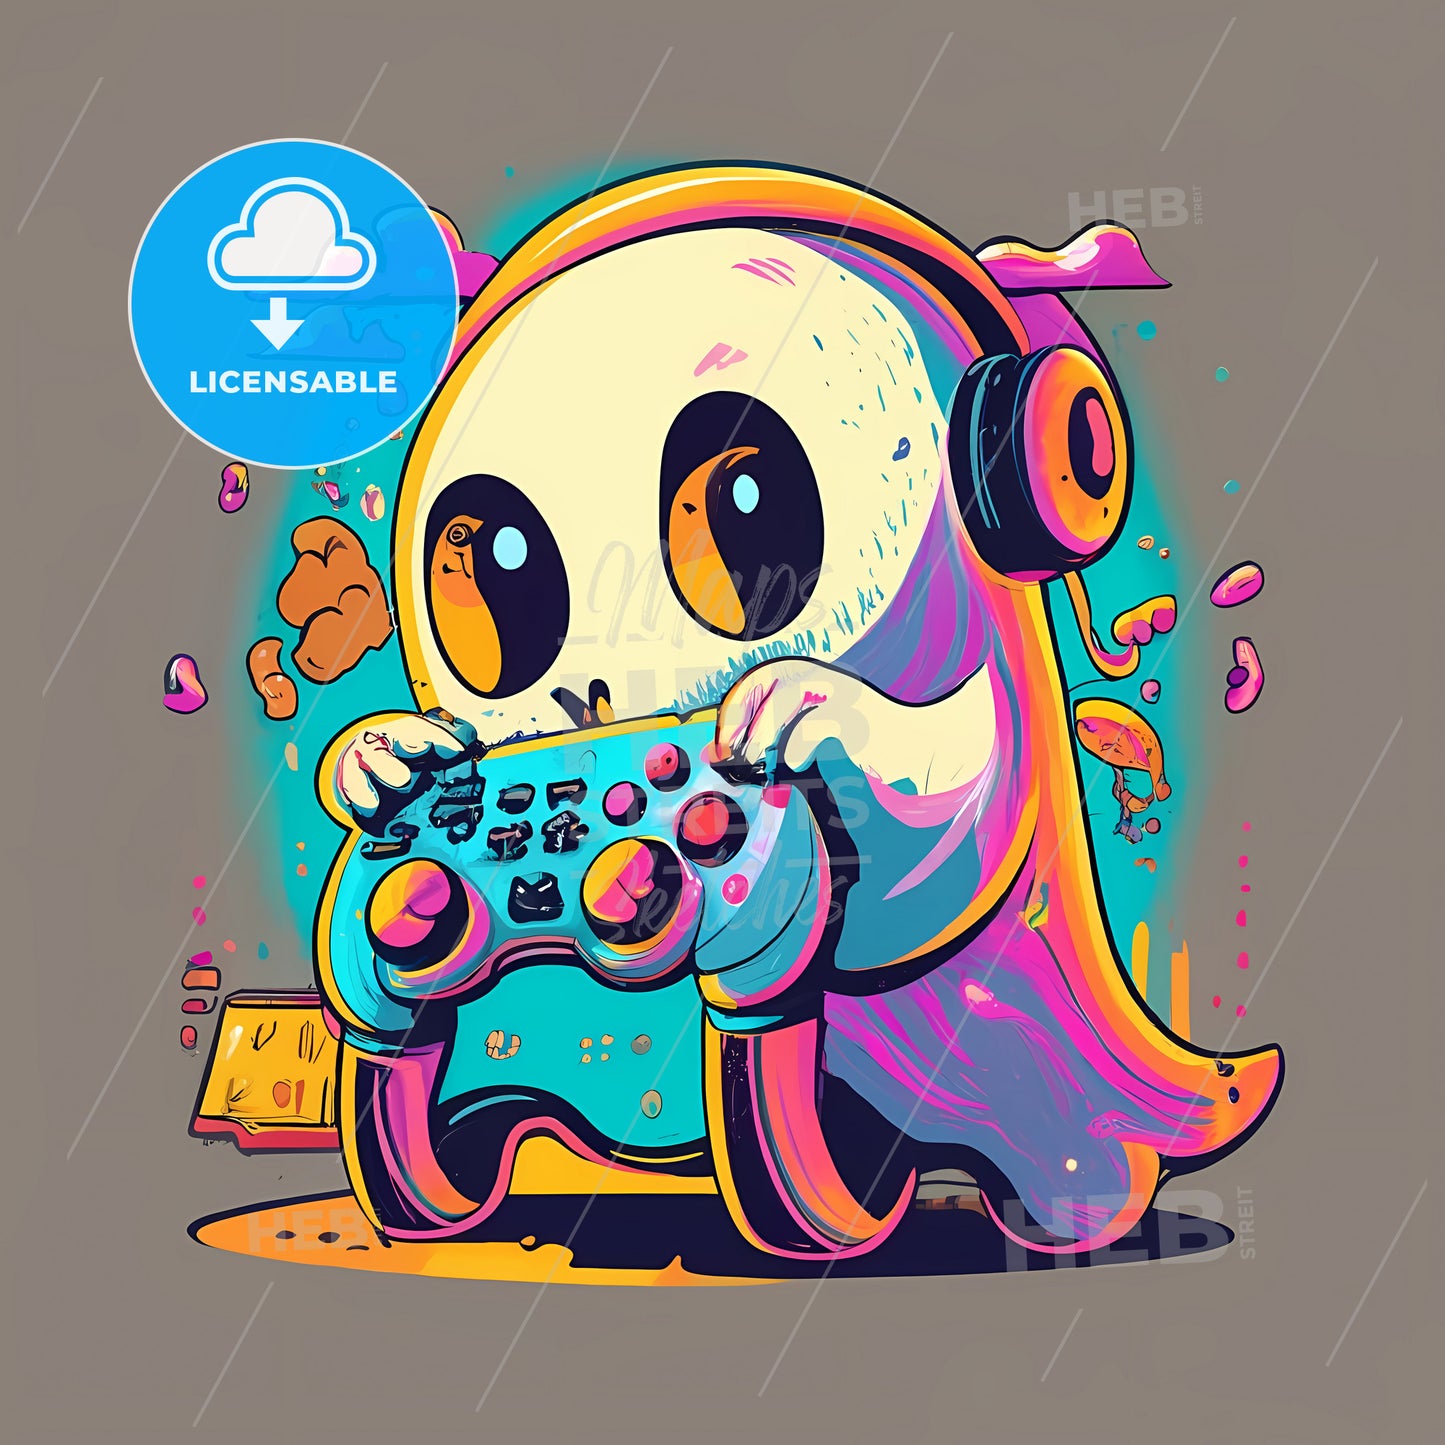 A Cartoon Of A Ghost Playing A Video Game